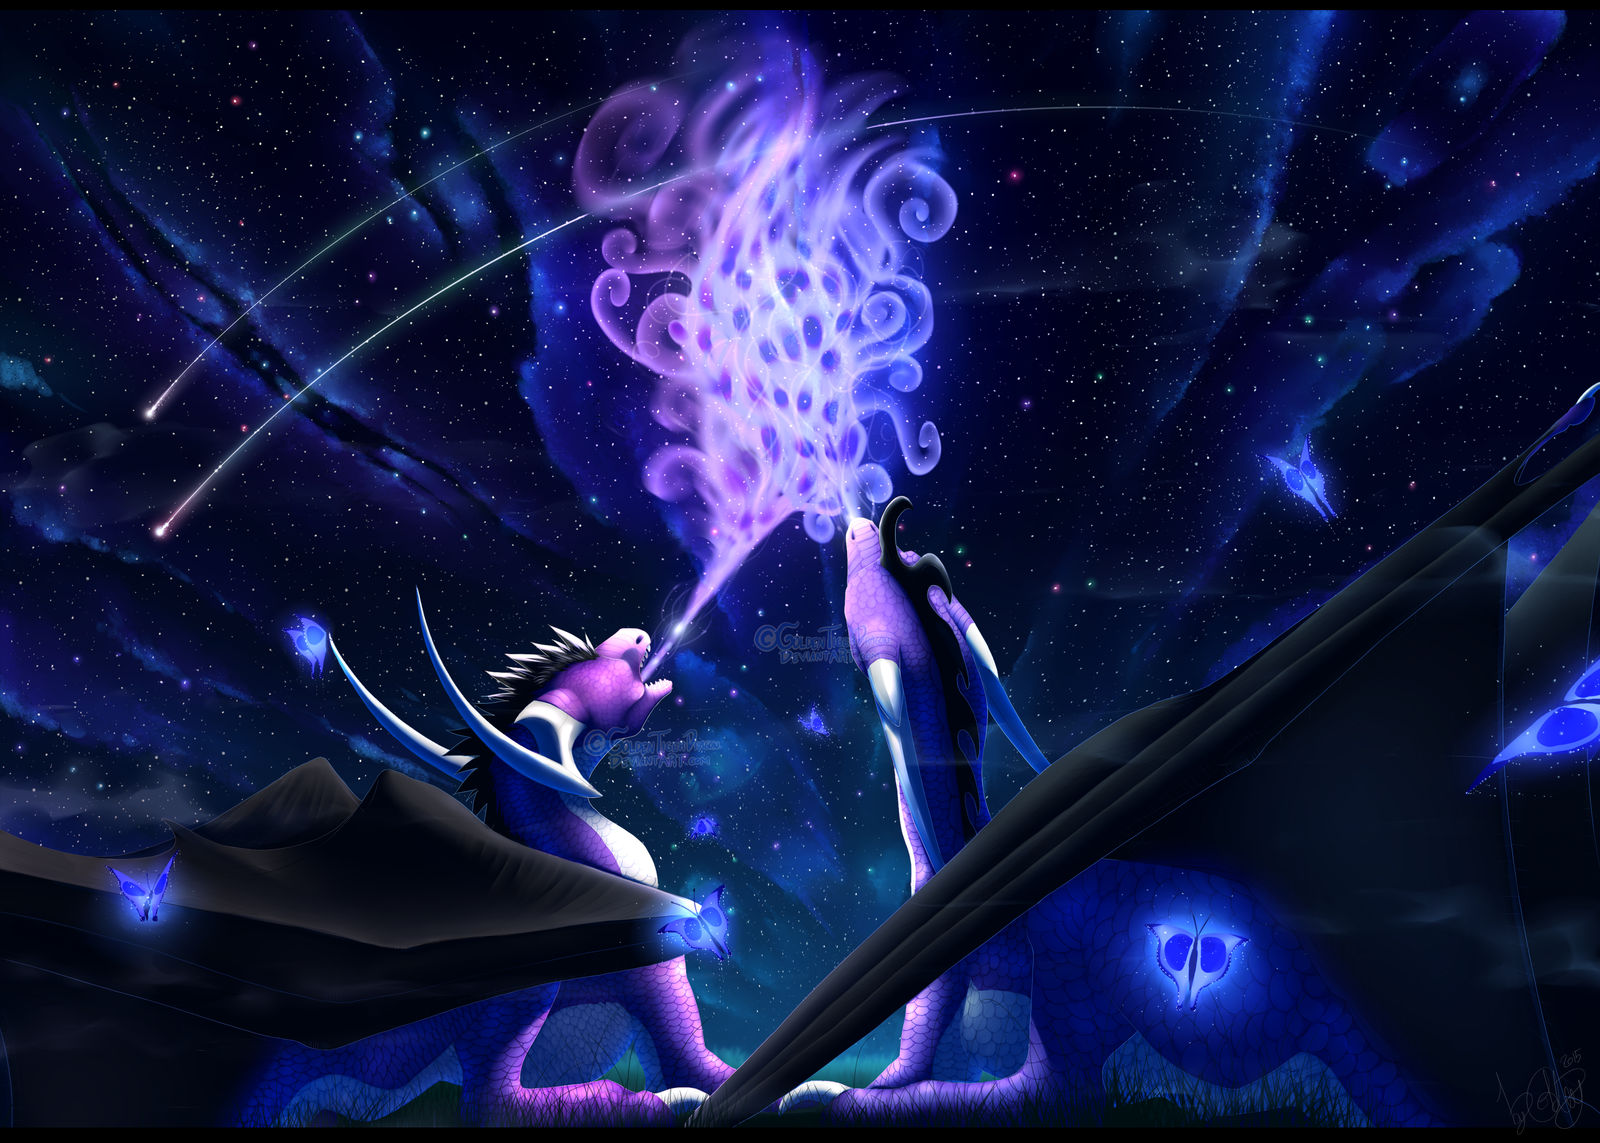 the_silence_of_night_by_goldeywashere_d8nynkk-fullview.png